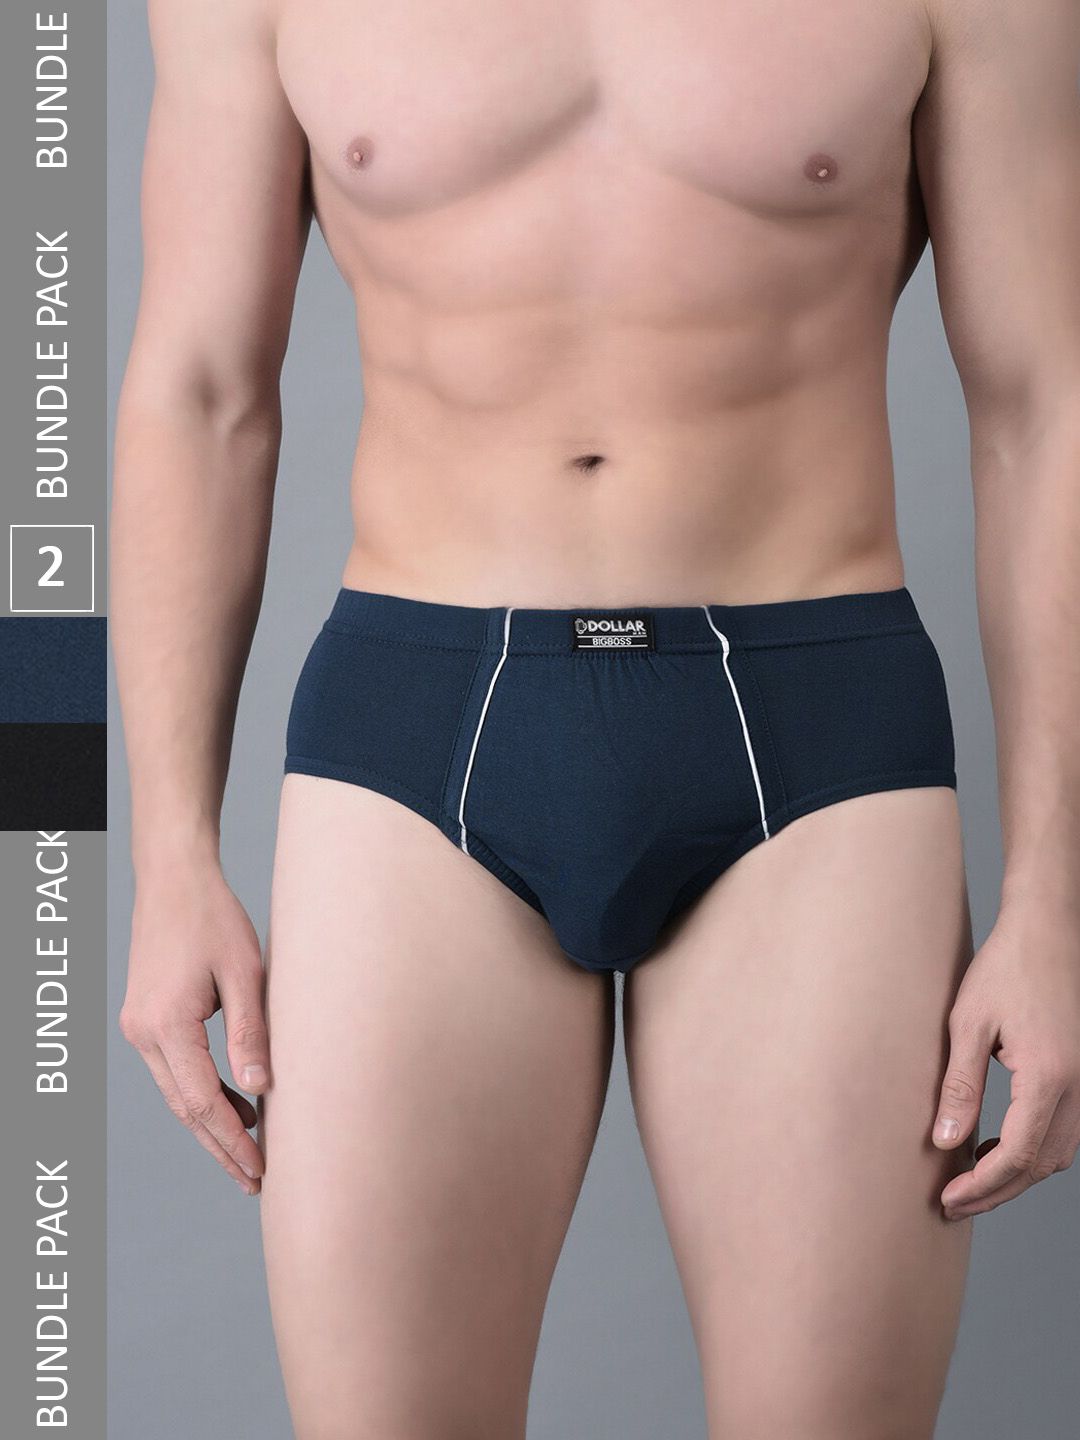 Buy Dollar Dollar Men Pack Of 3 Assorted Cotton Basic Briefs at Redfynd